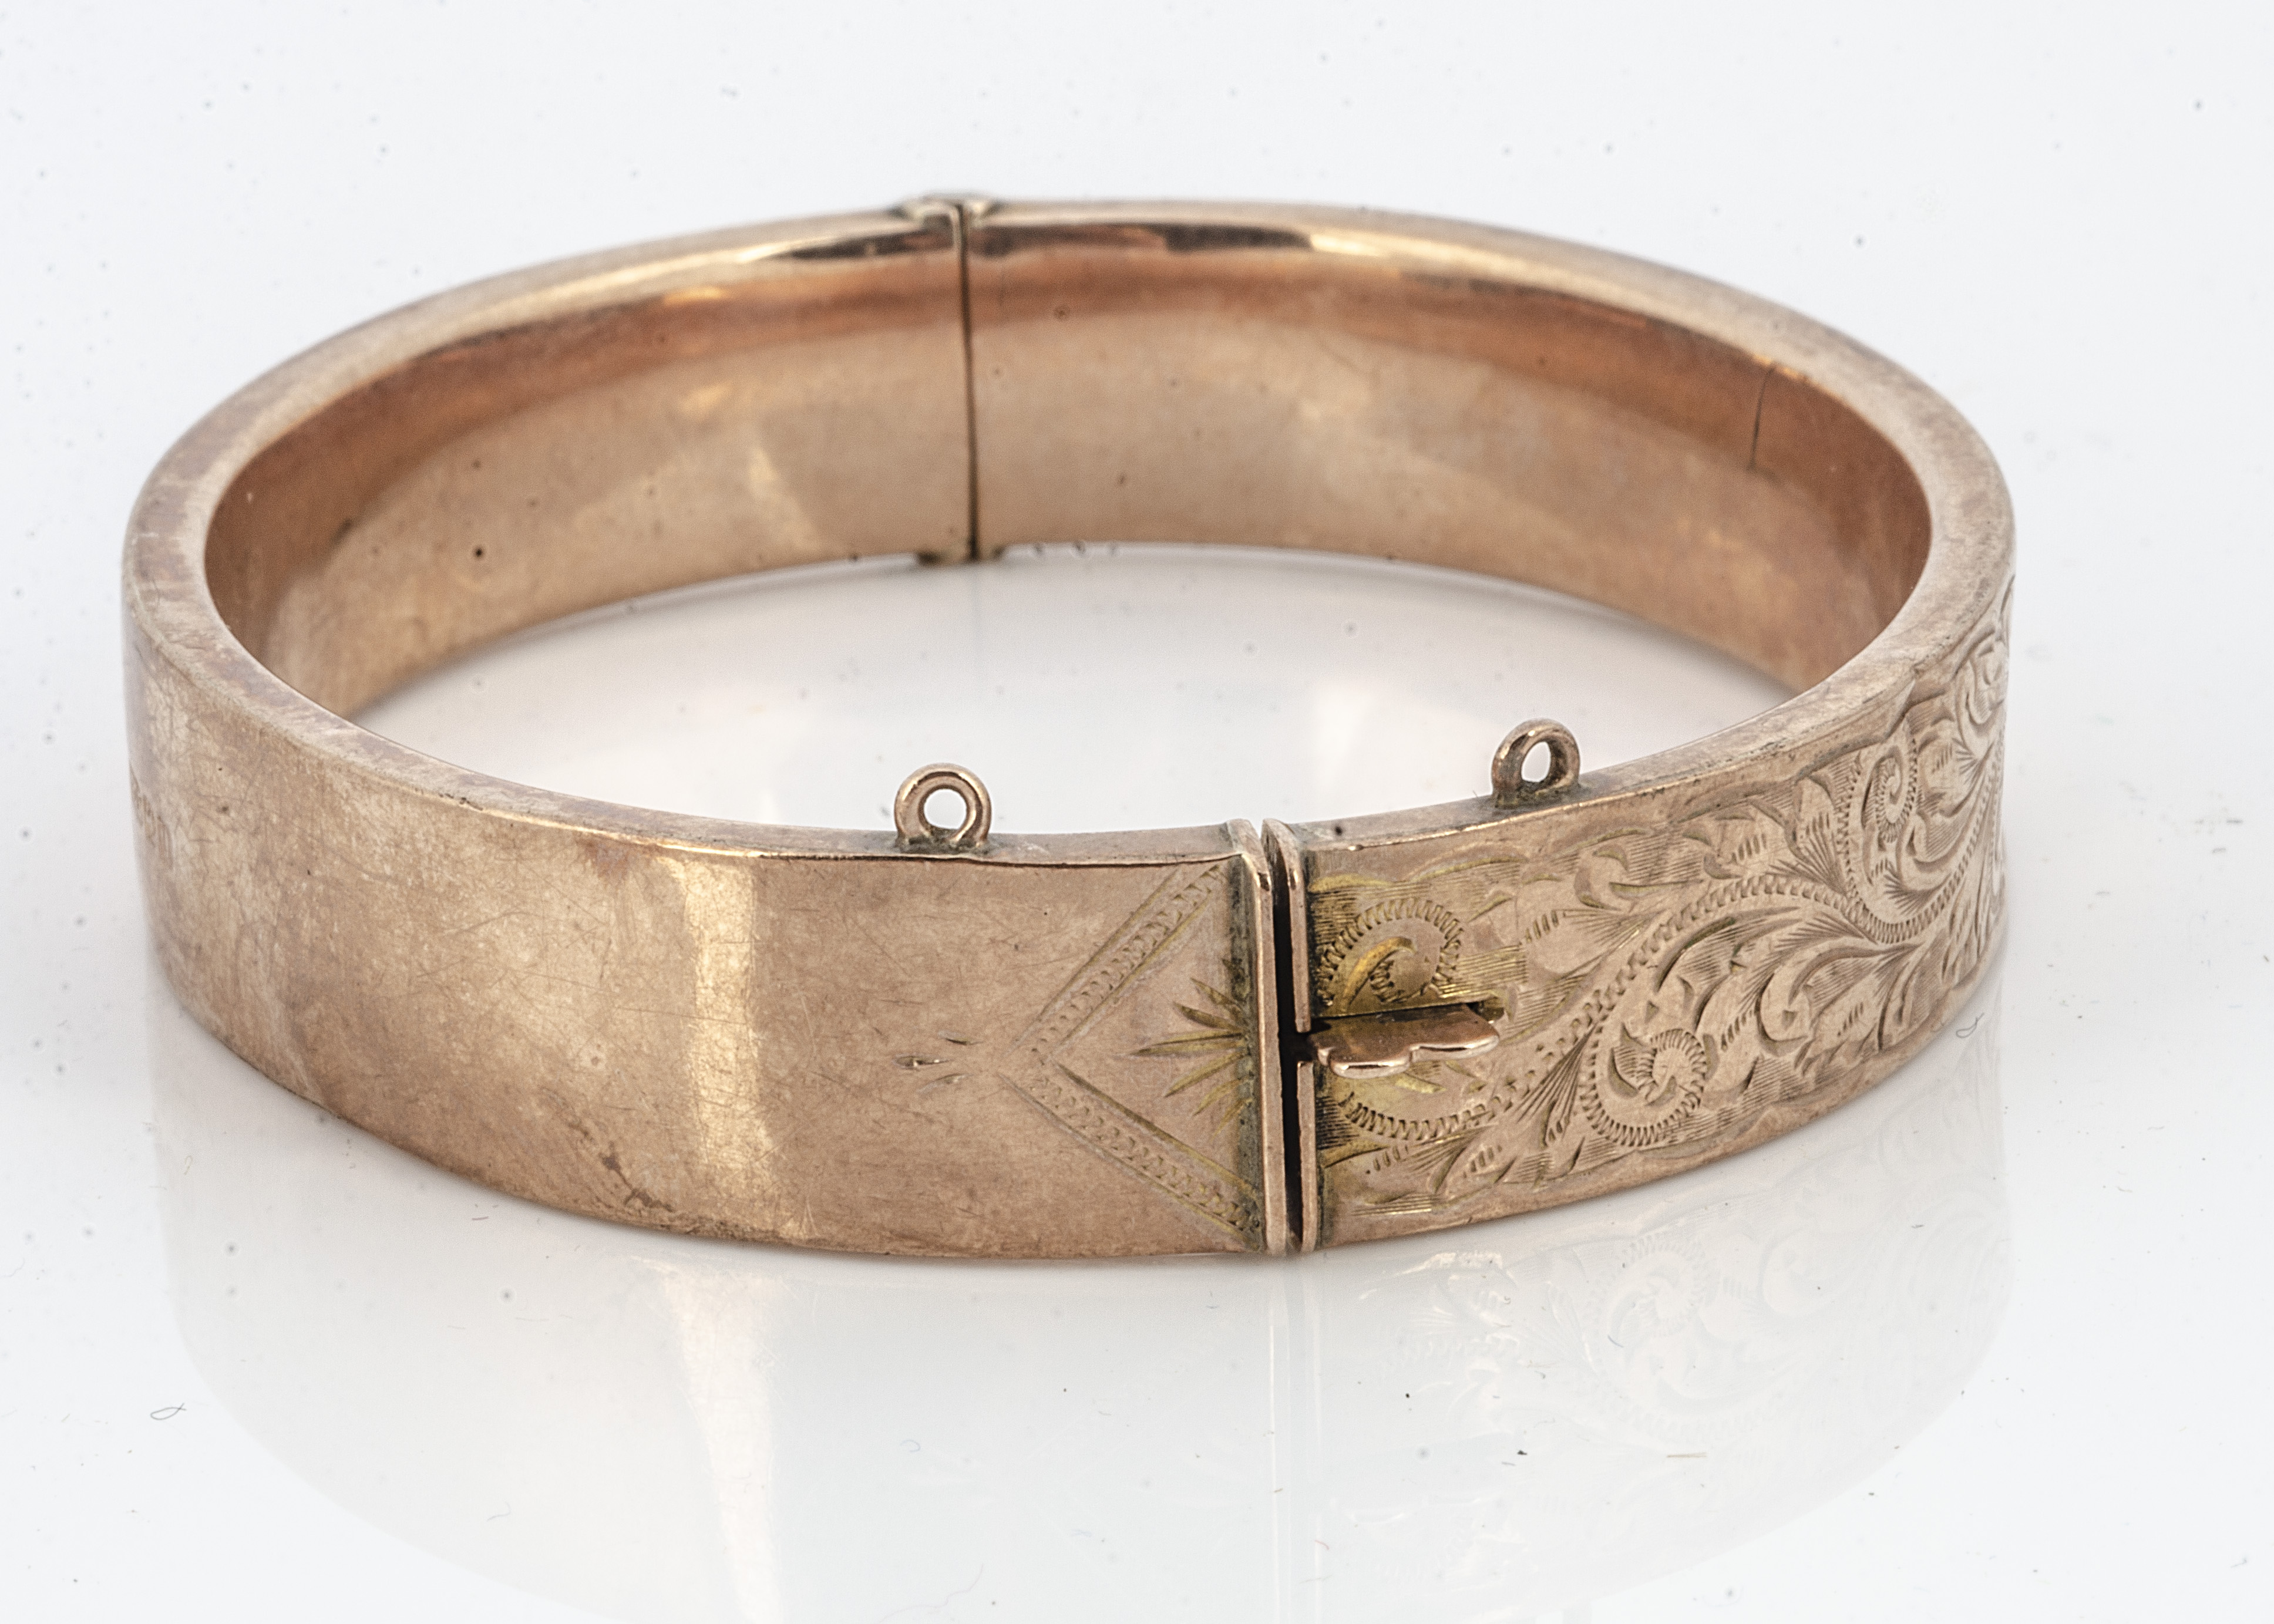 A 9ct gold hinged bangle, with engraved floral decoration, 6cm x 5.2cm internal measurement, 17.2g - Image 2 of 2